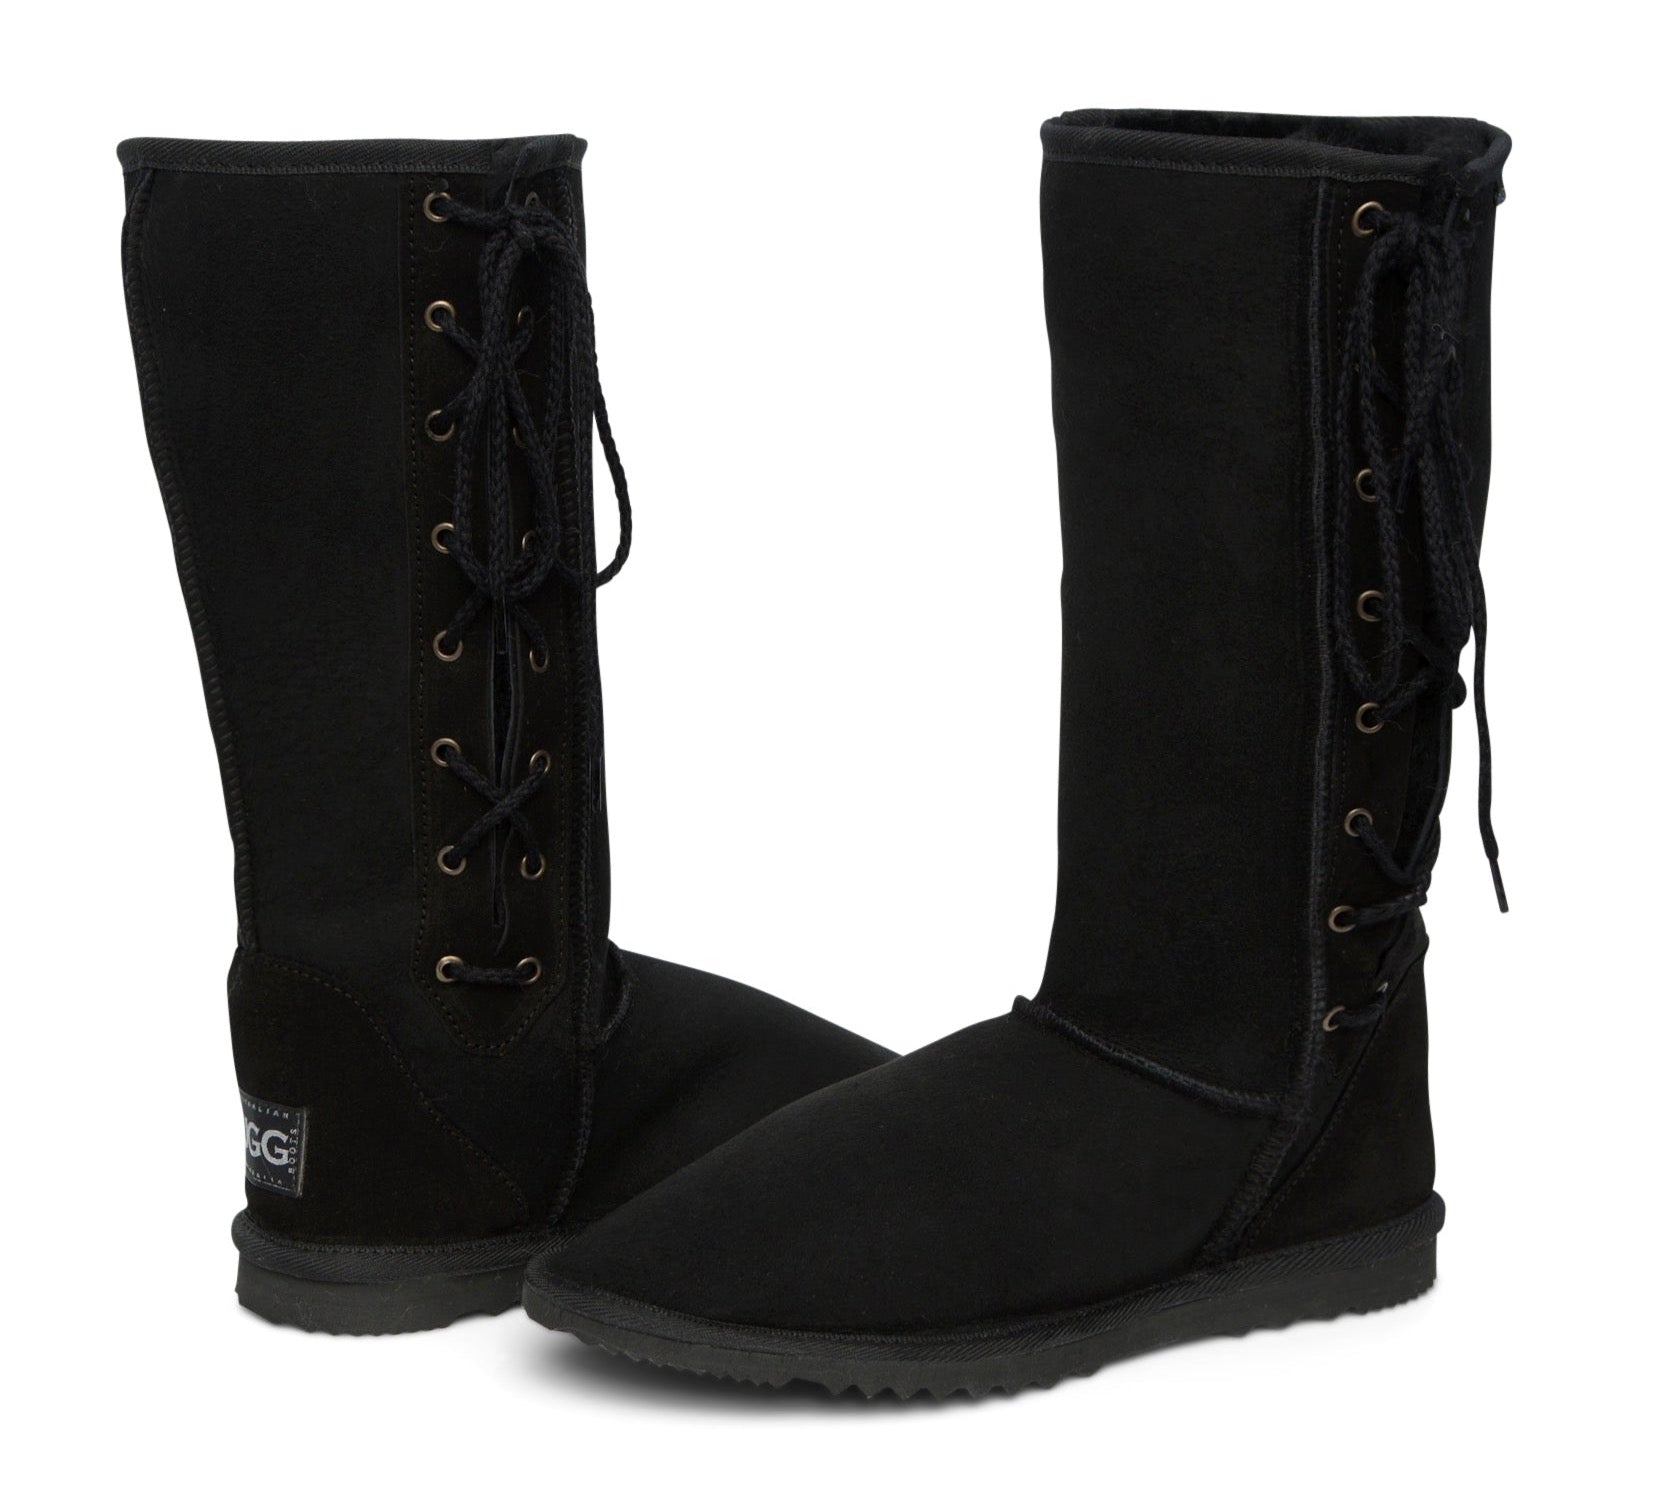 WOMEN'S LACE UP TALL BOOTS